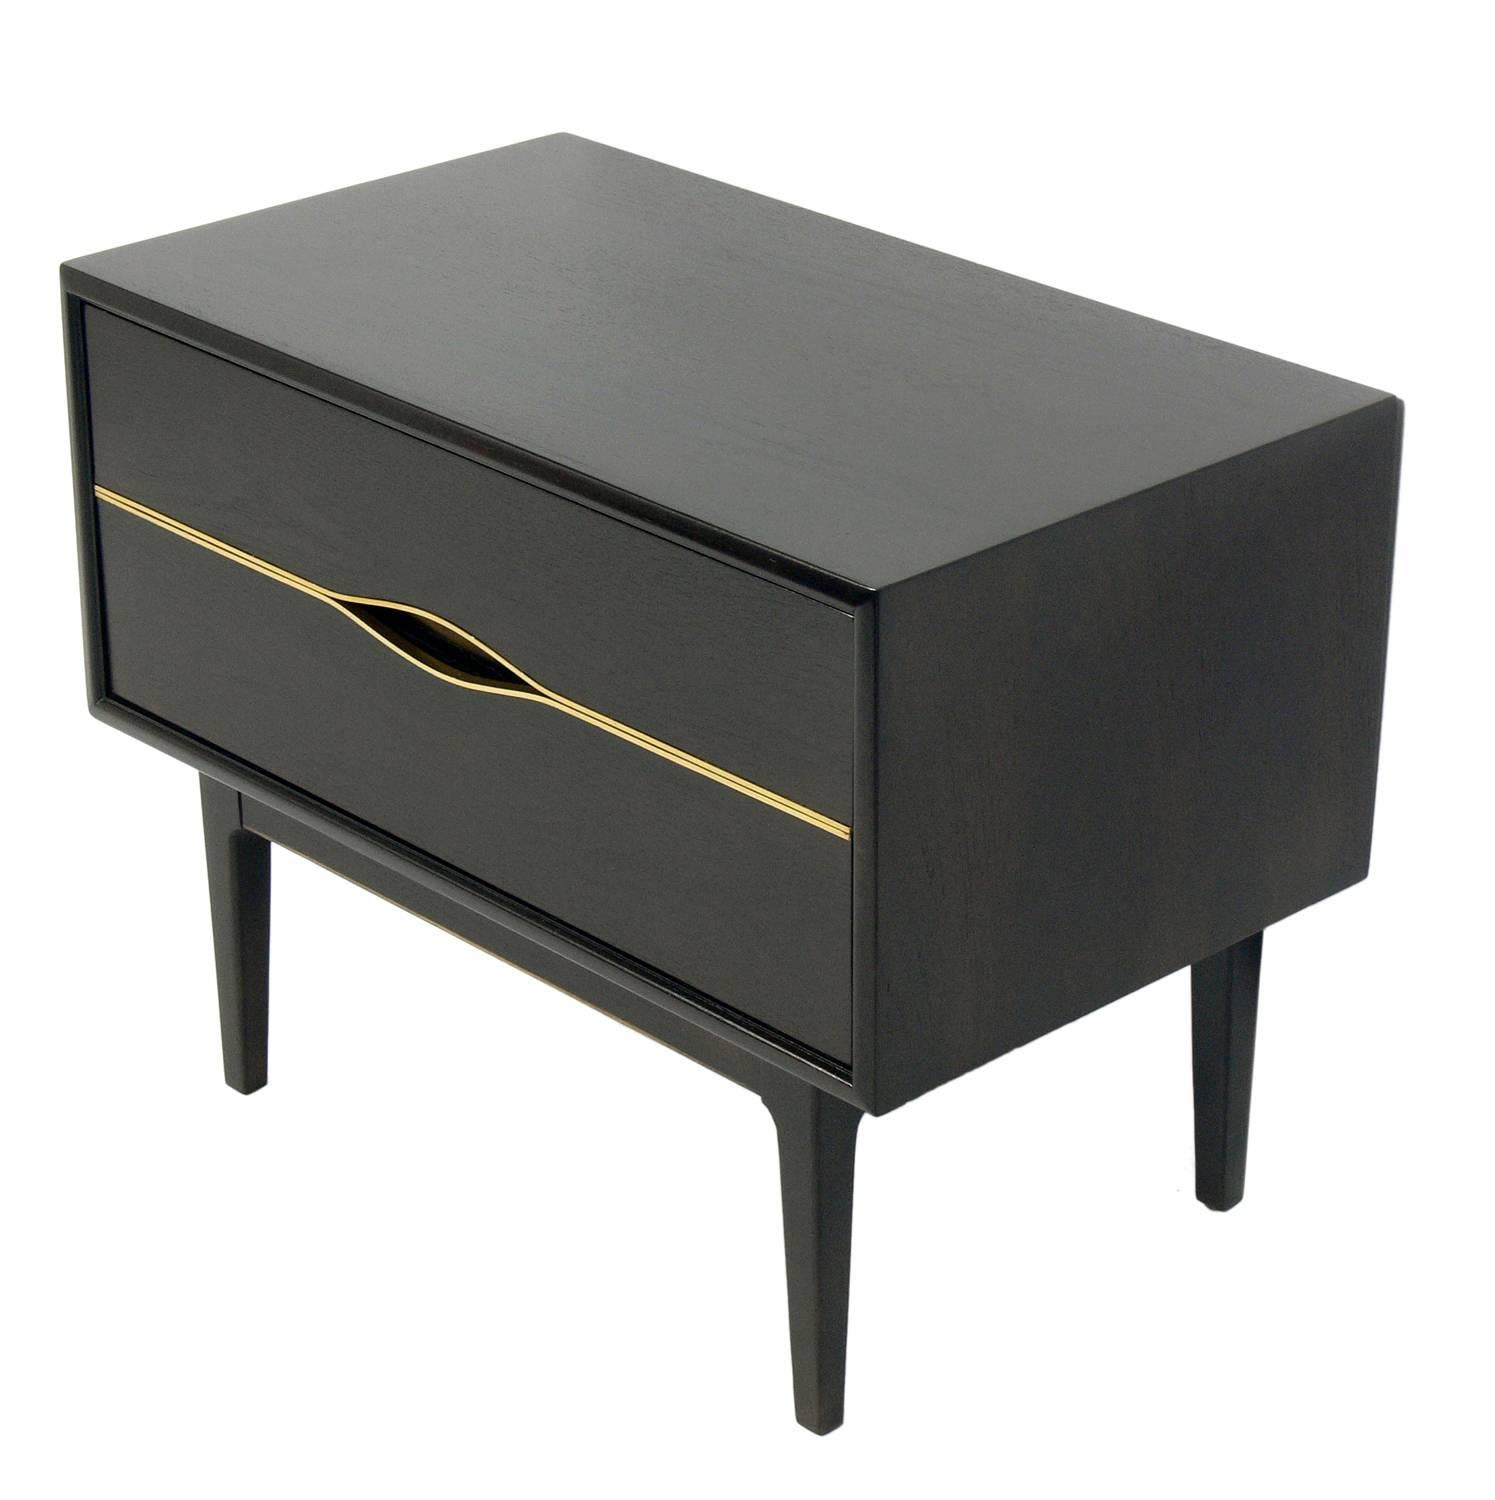 A pair of Ultra dark brown Mid-Century nightstand or side table with brass trim, American, circa 1960s. This piece has been refinished in an ultra deep brown color and the brass trim has been hand polished and lacquered.